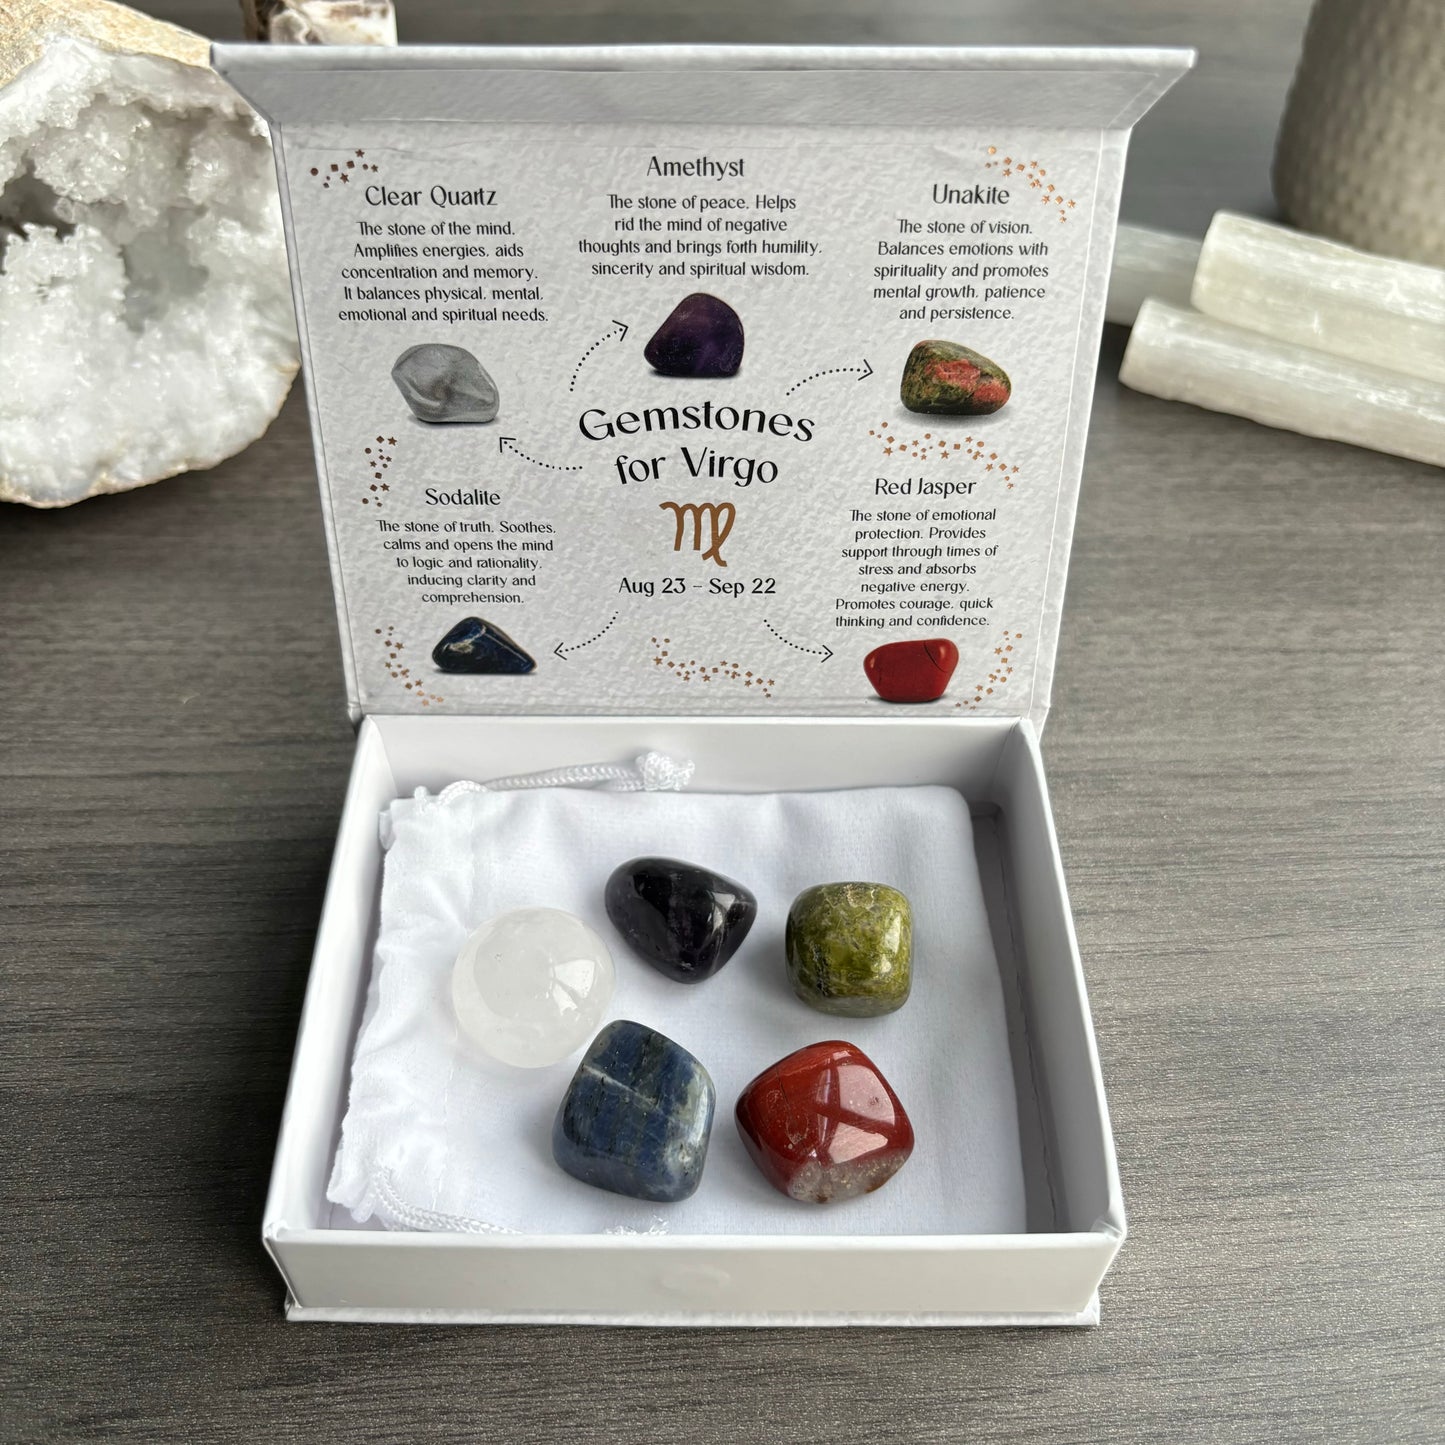 This stunning set of five crystal tumblestones are perfect for the reliable, hard-working and organised Virgo. The set includes Clear Quartz for balance, Amethyst for peace, Sodalite for clarity, Unakite for patience and Red Jasper for emotional protection. Beautifully presented in a magnetic closure gift box with information regarding each crystal, and a velvet drawstring bag to keep the tumblestones protected